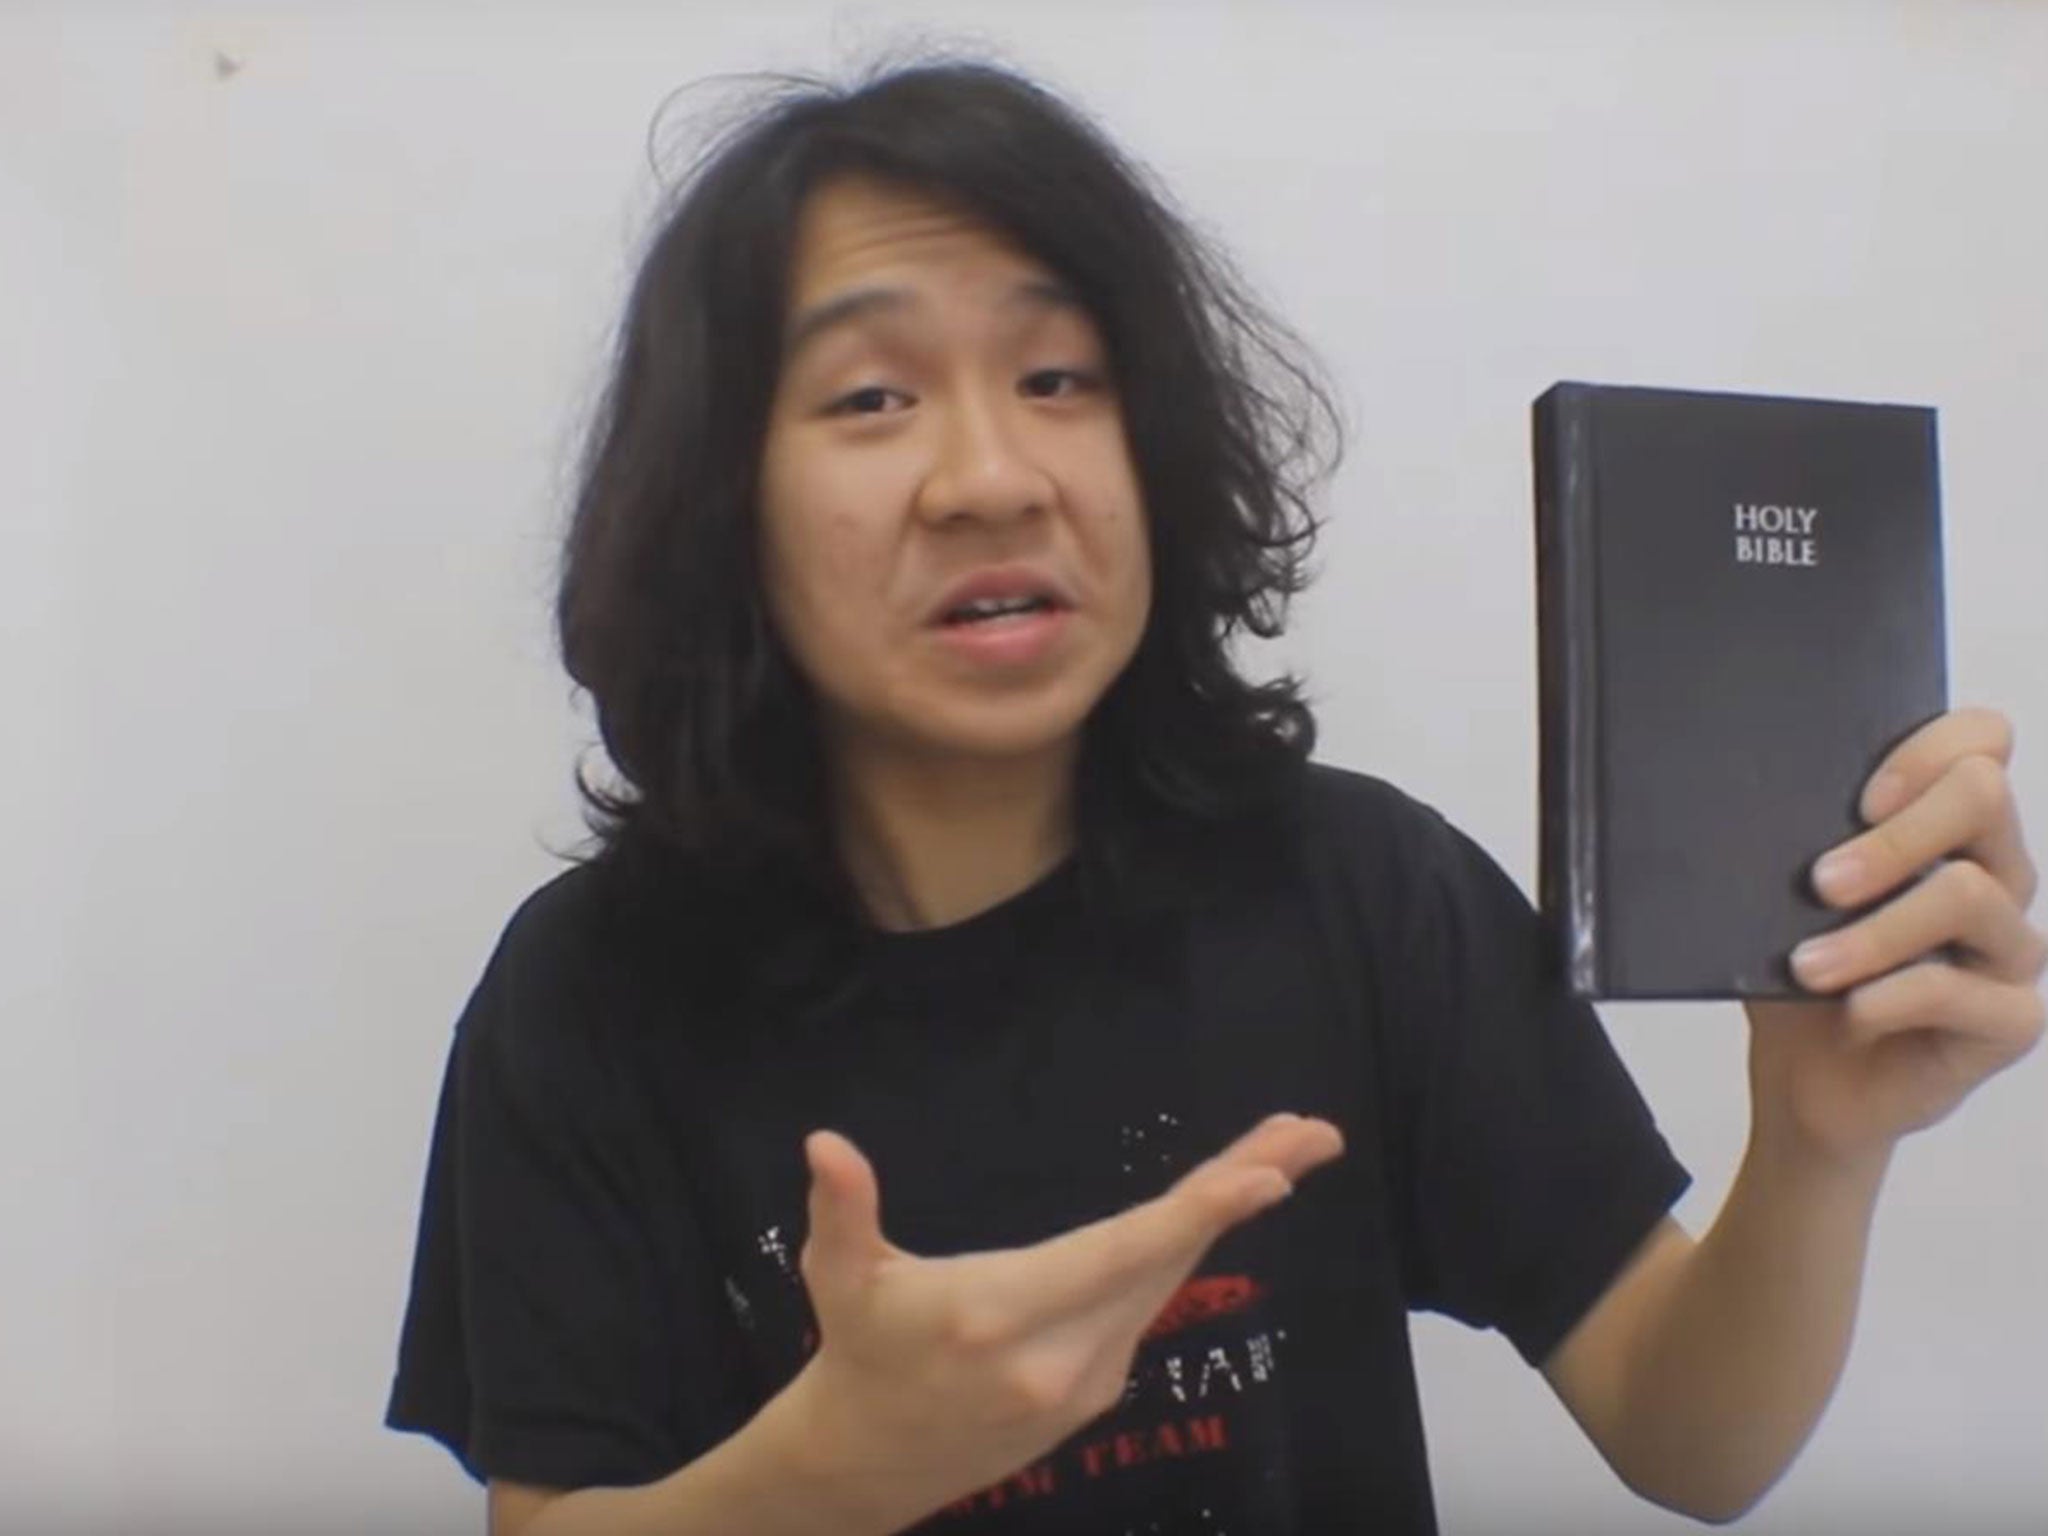 Amos Yee, 17, appearing in a video on Christianity cited by prosecutors in Singapore